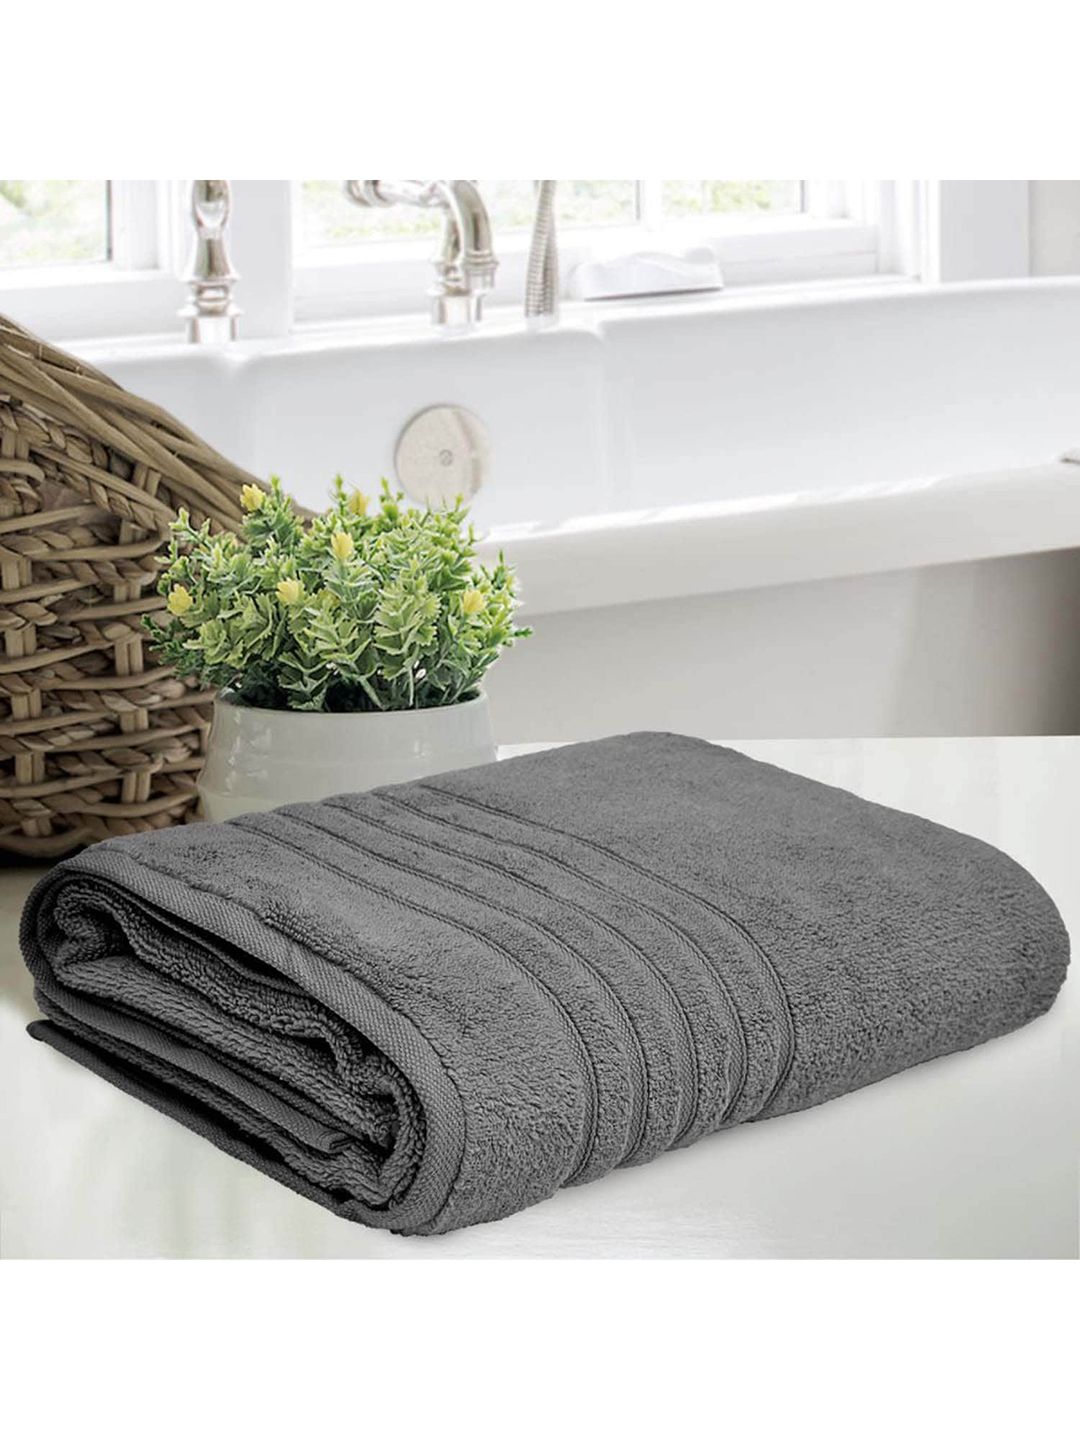 haus & kinder Grey Solid Pure Cotton 600 GSM Bath Towel Price in India